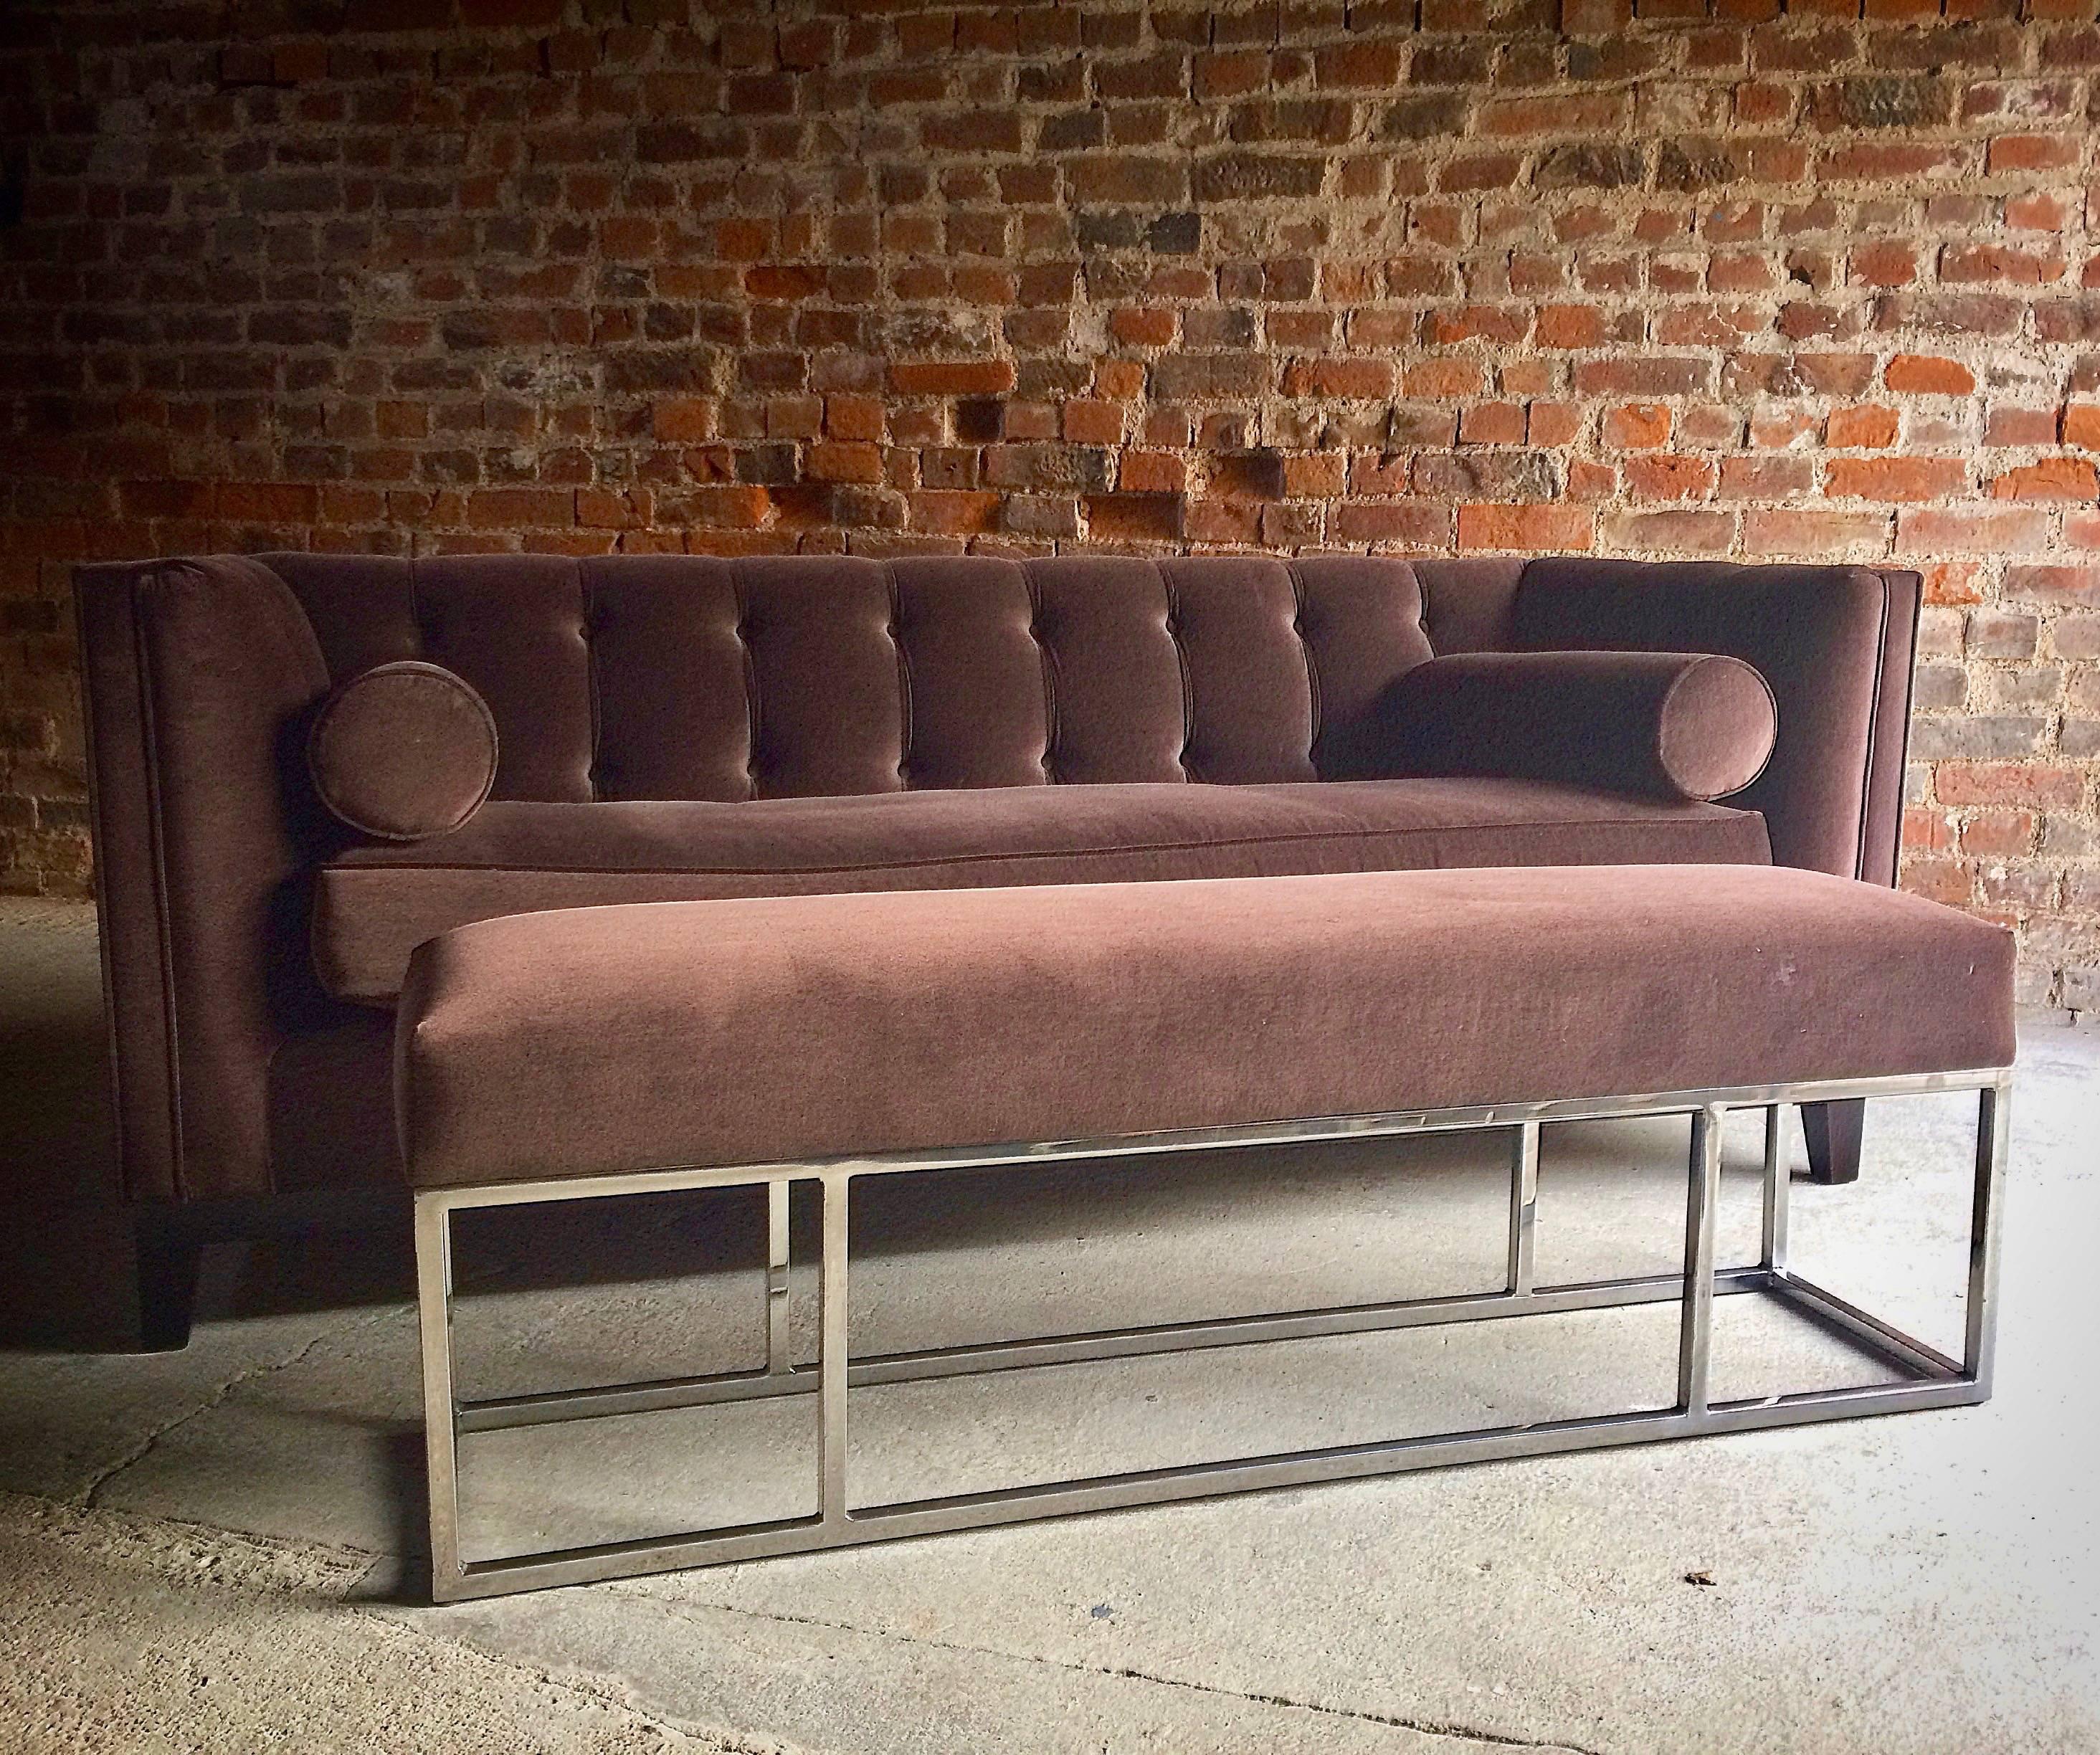 Bespoke Chesterfield Sofa with Matching Foot Stool Brown Velvet Sublime 5